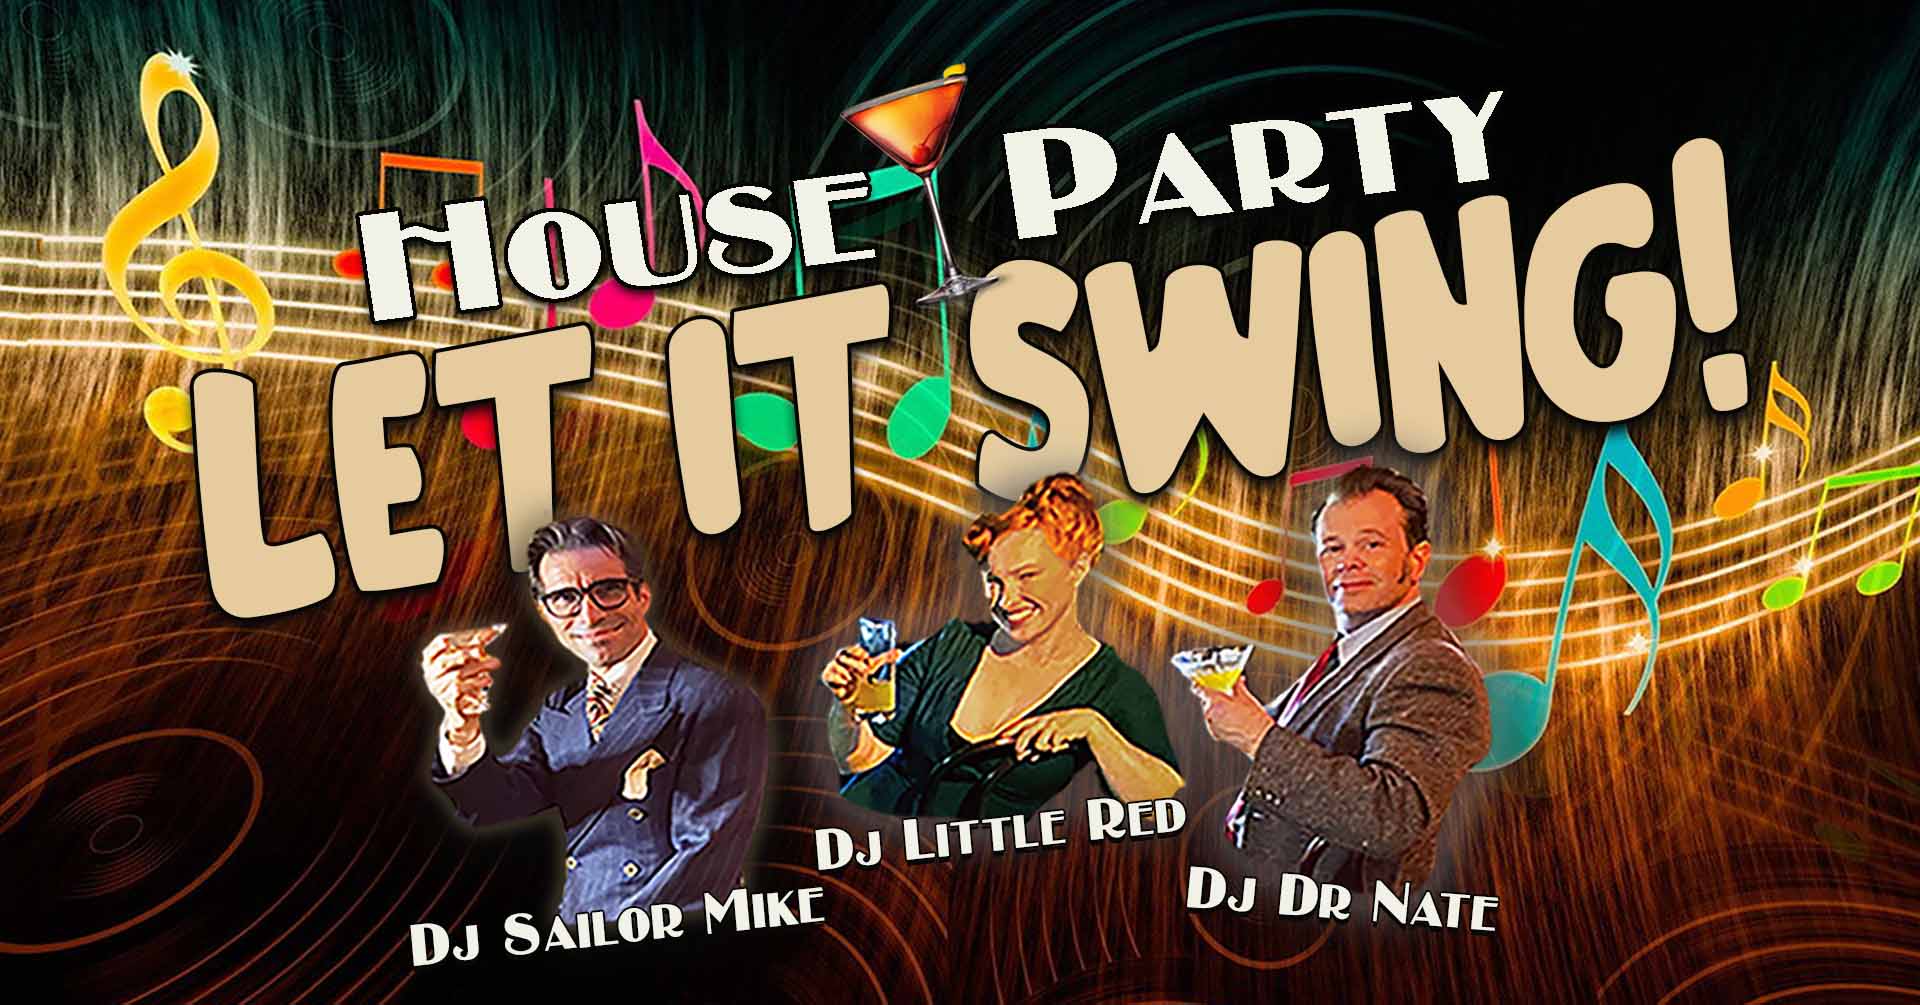 HOUSE PARTY • LET IT SWING with DR. NATE, SAILOR MIKE & LITTLE RED at The Moose!